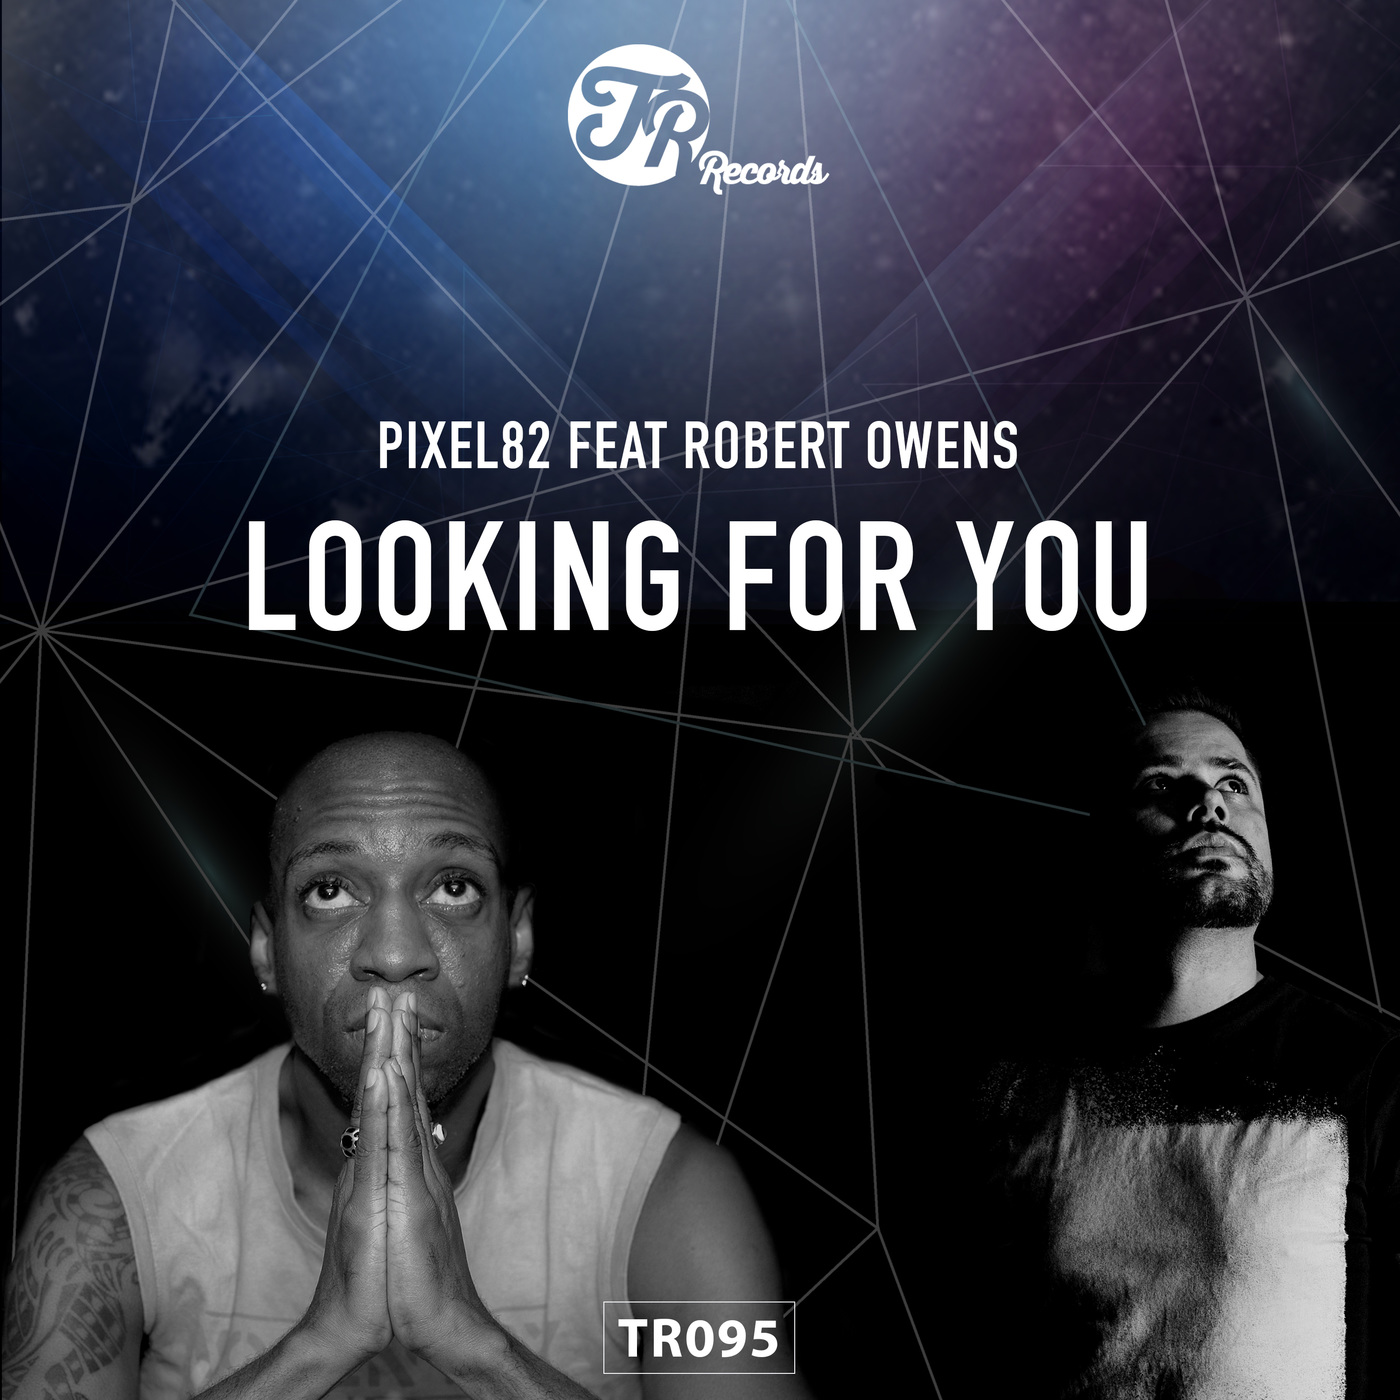 Pixel82 ft Robert Owens - Looking For You / TR Records